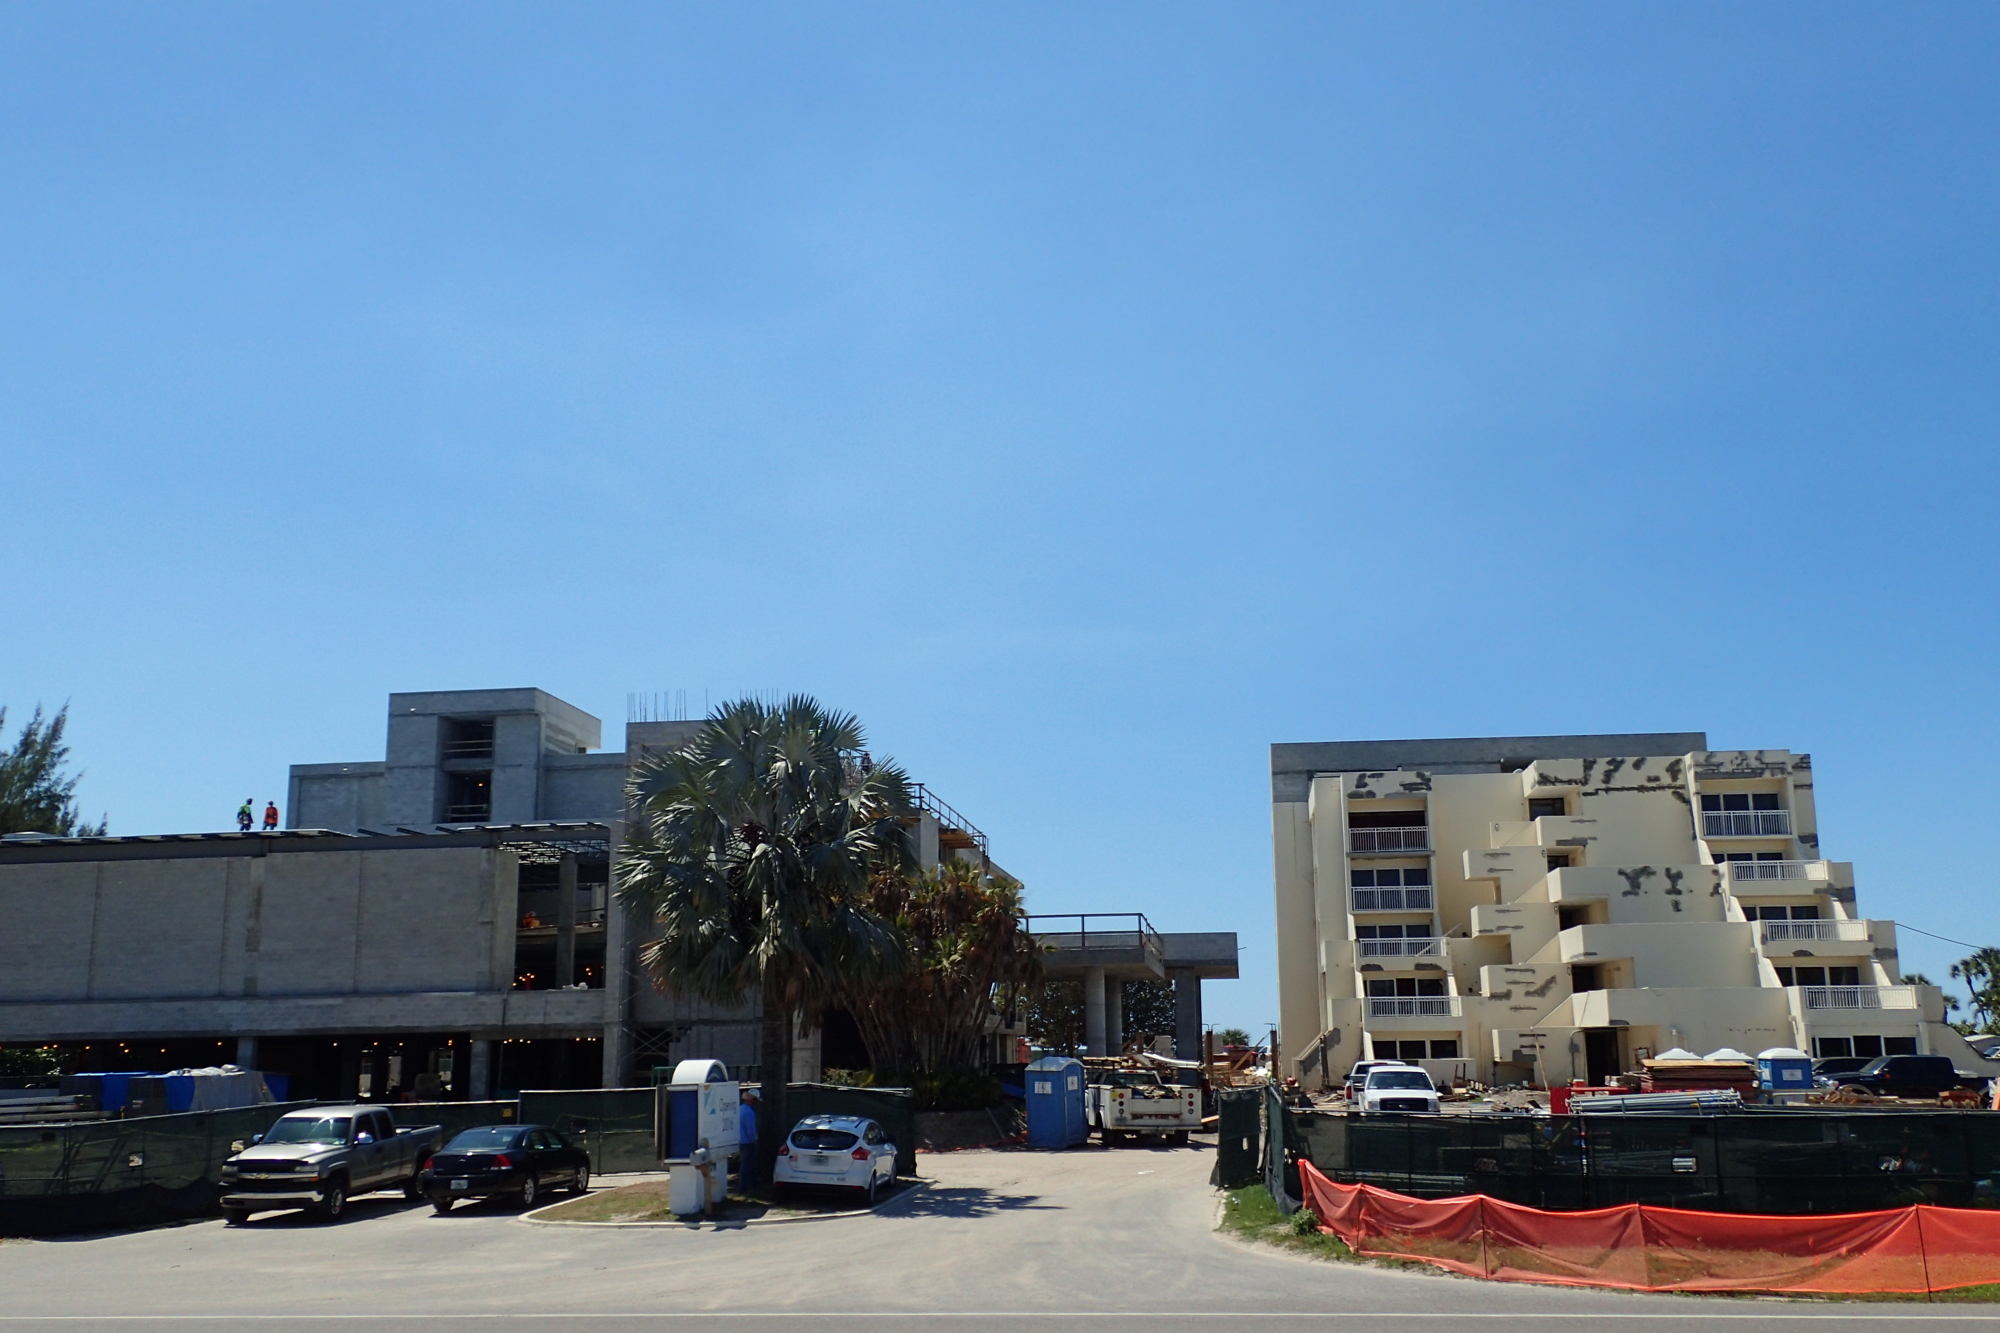 The former Hilton is under renovations and will reopen as the Zota Beach Resort.